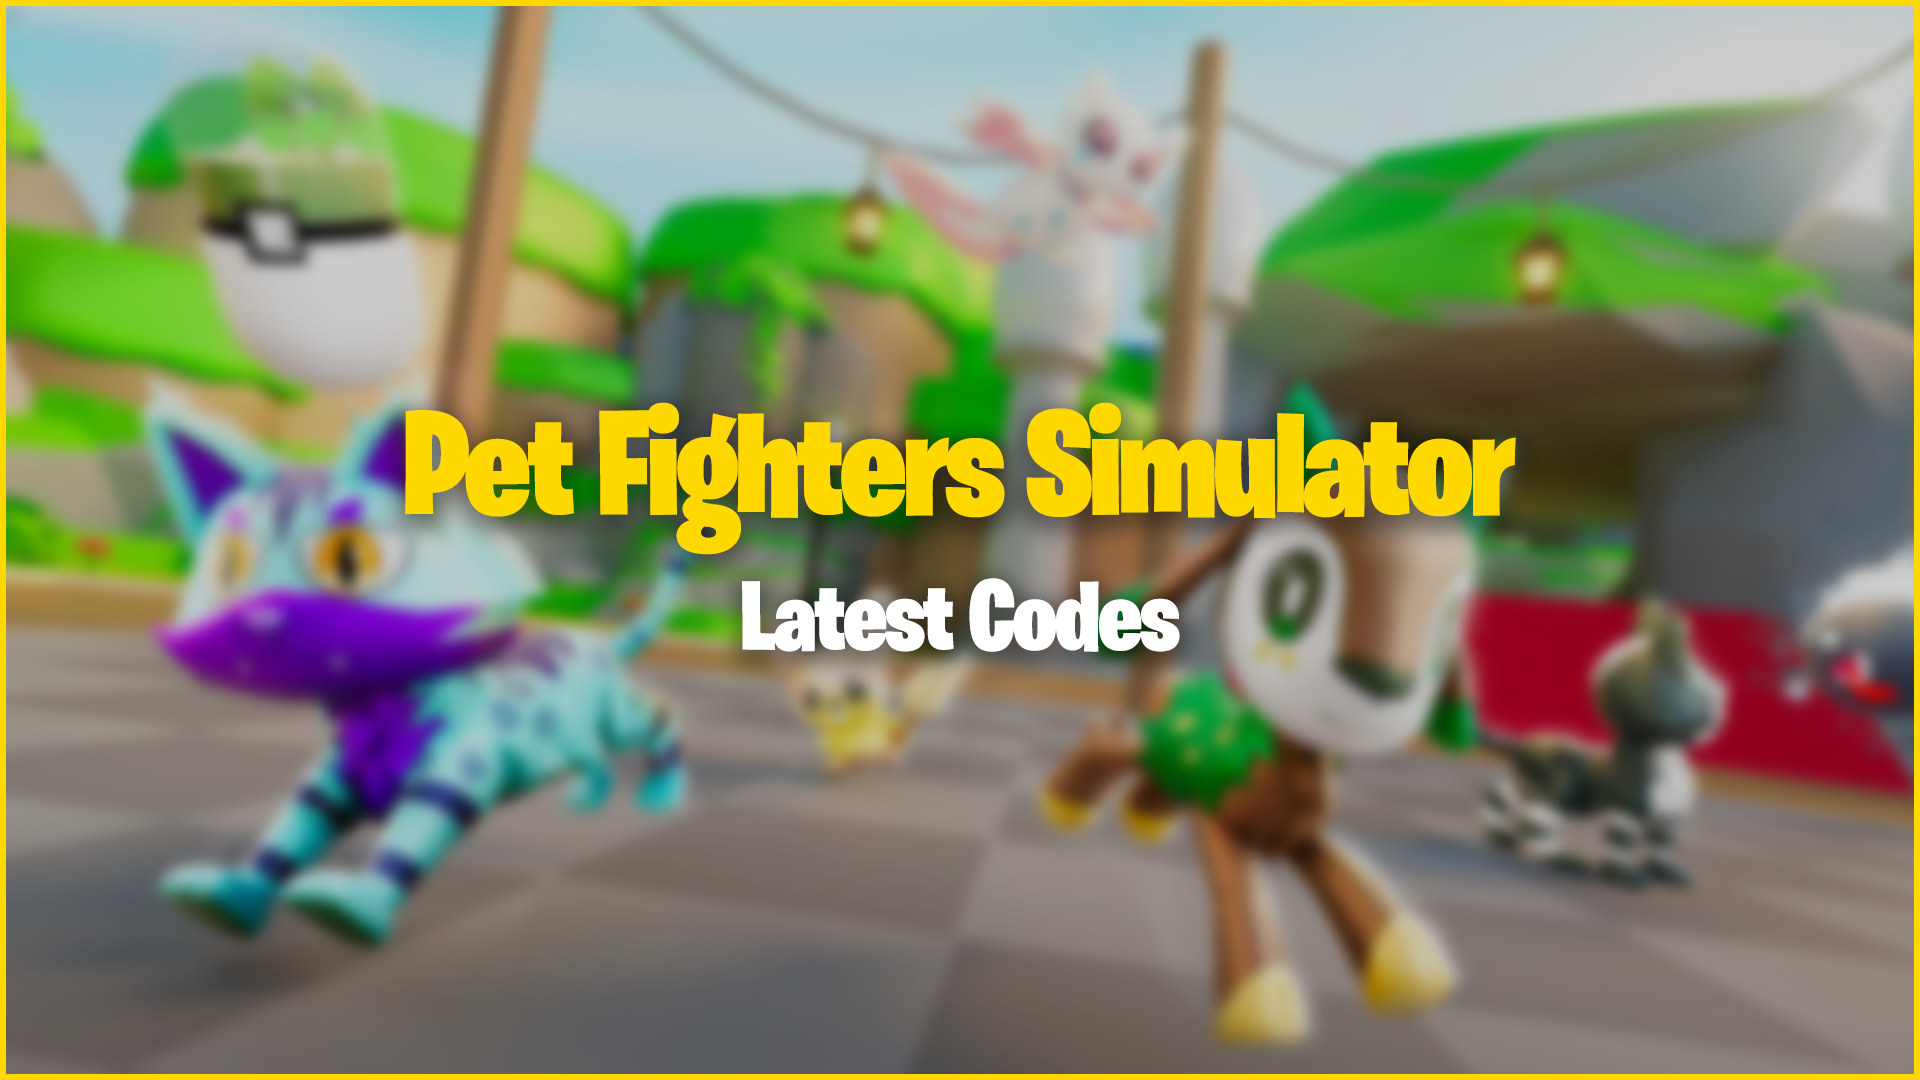 Collect all pets codes